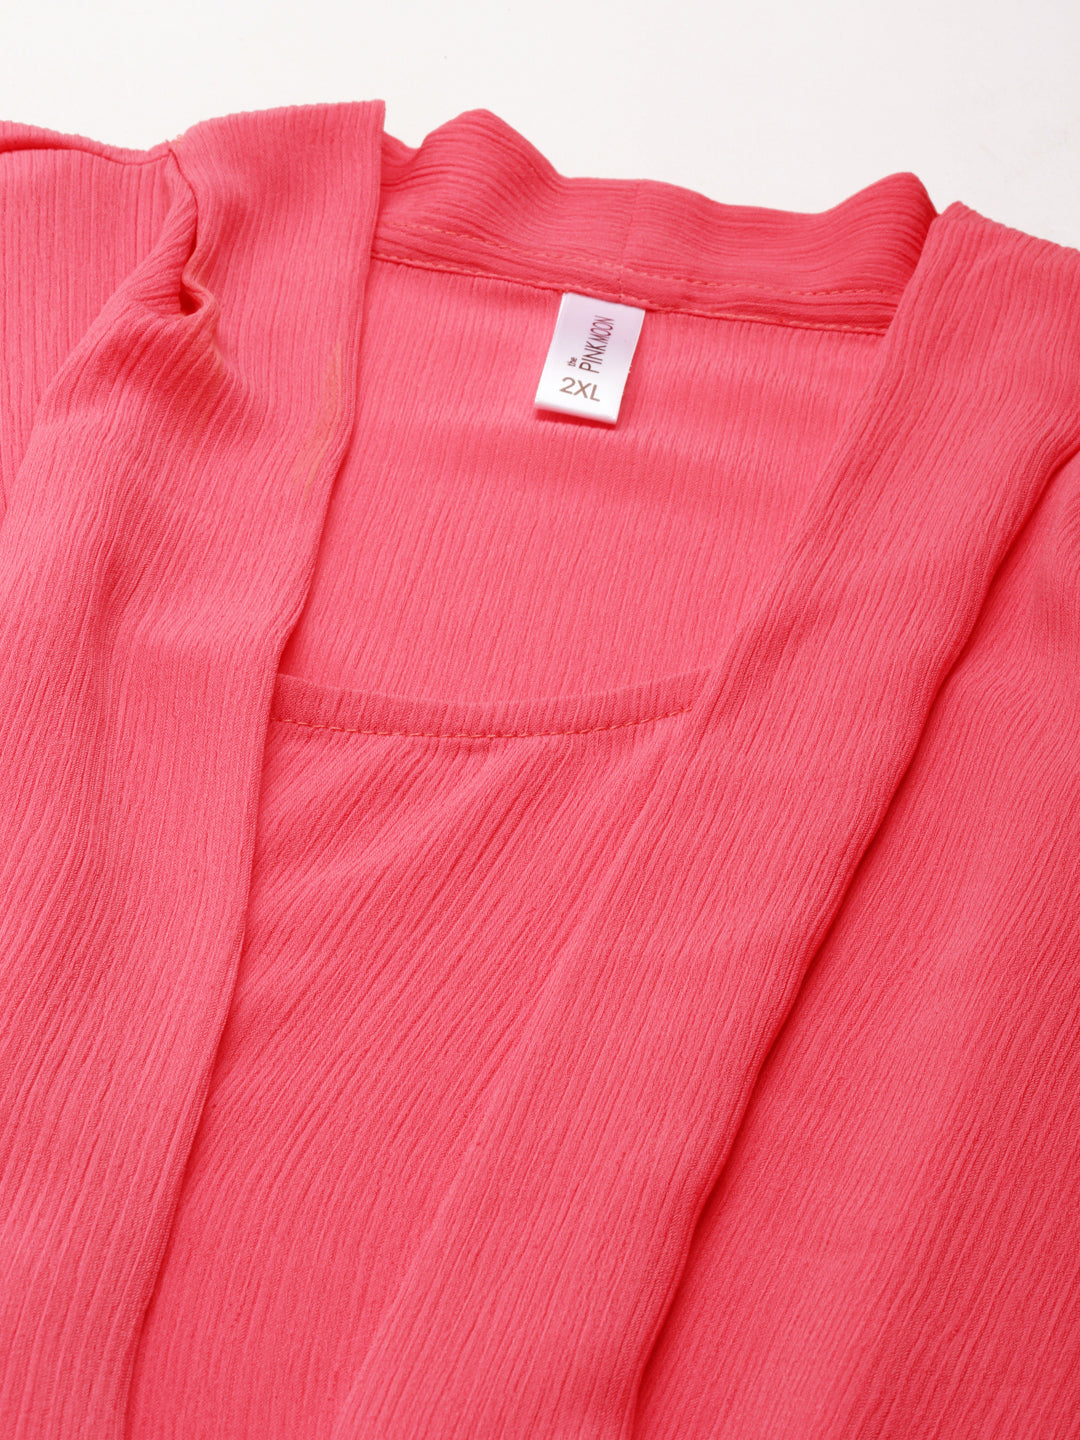 SOLID PINK LAYERED TOP